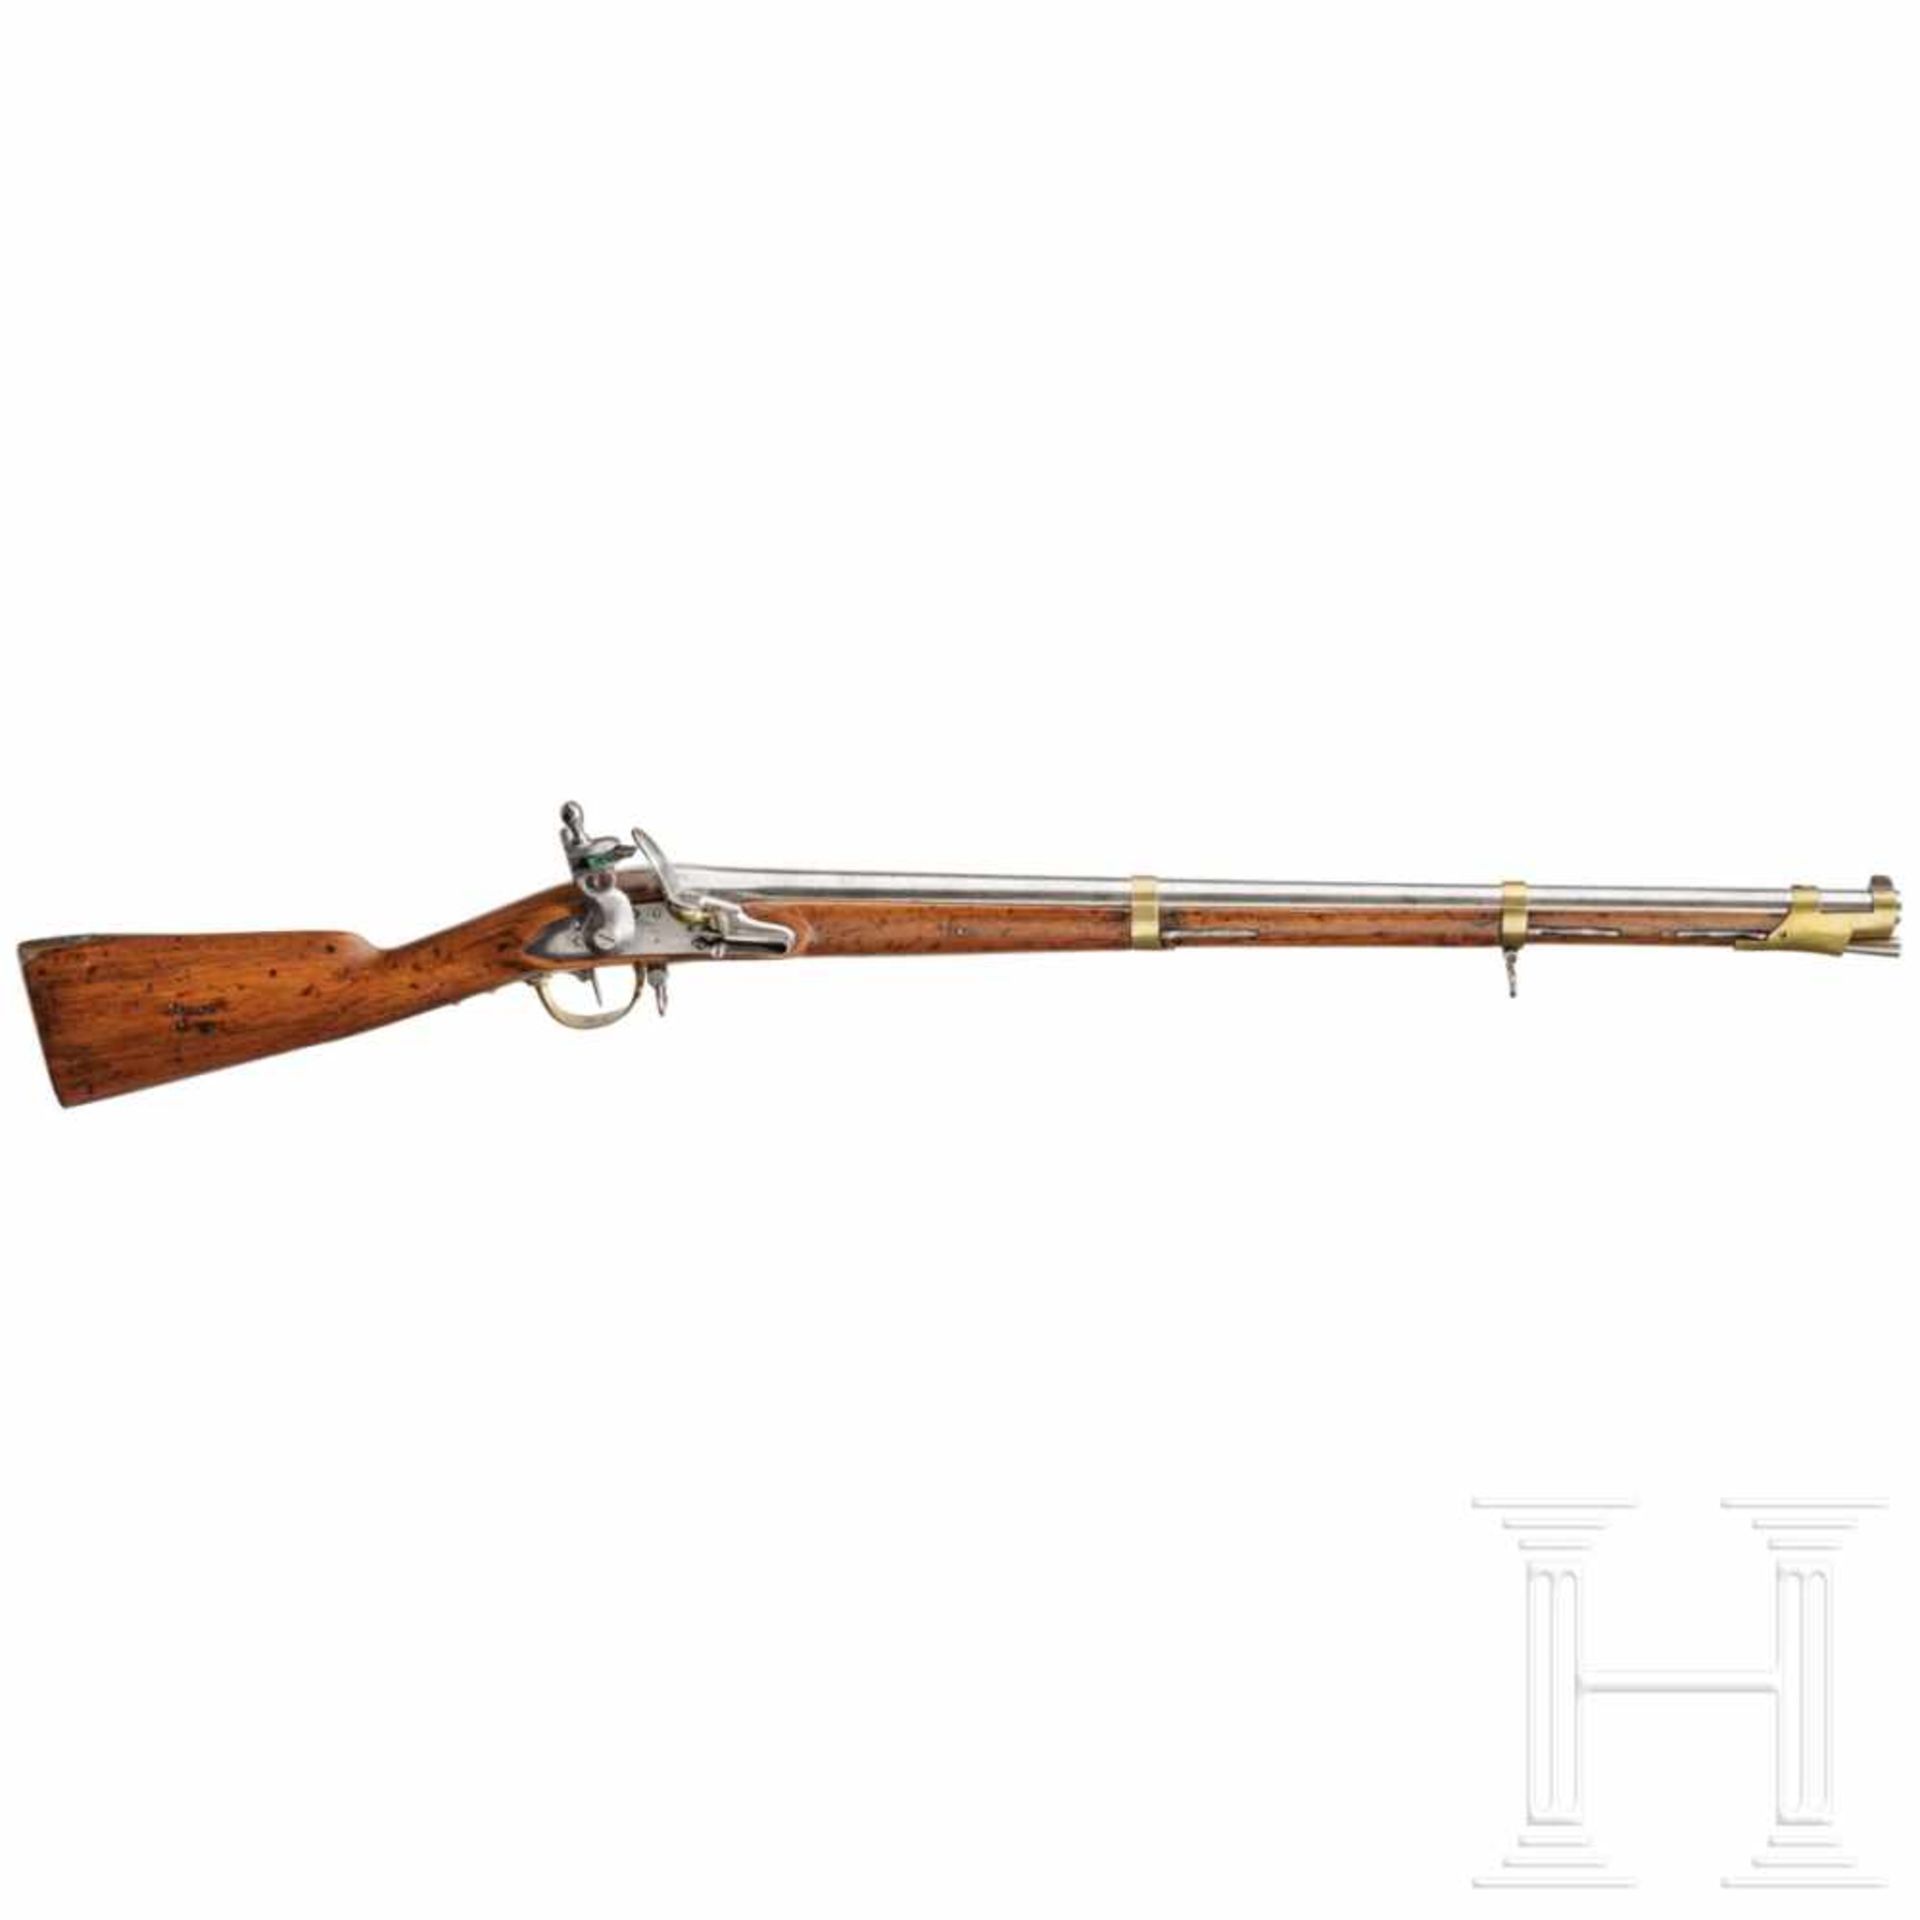 A Prussian Drill Musket for the Garde-Jäger Bataillon, made from a French officer's musketGlatter